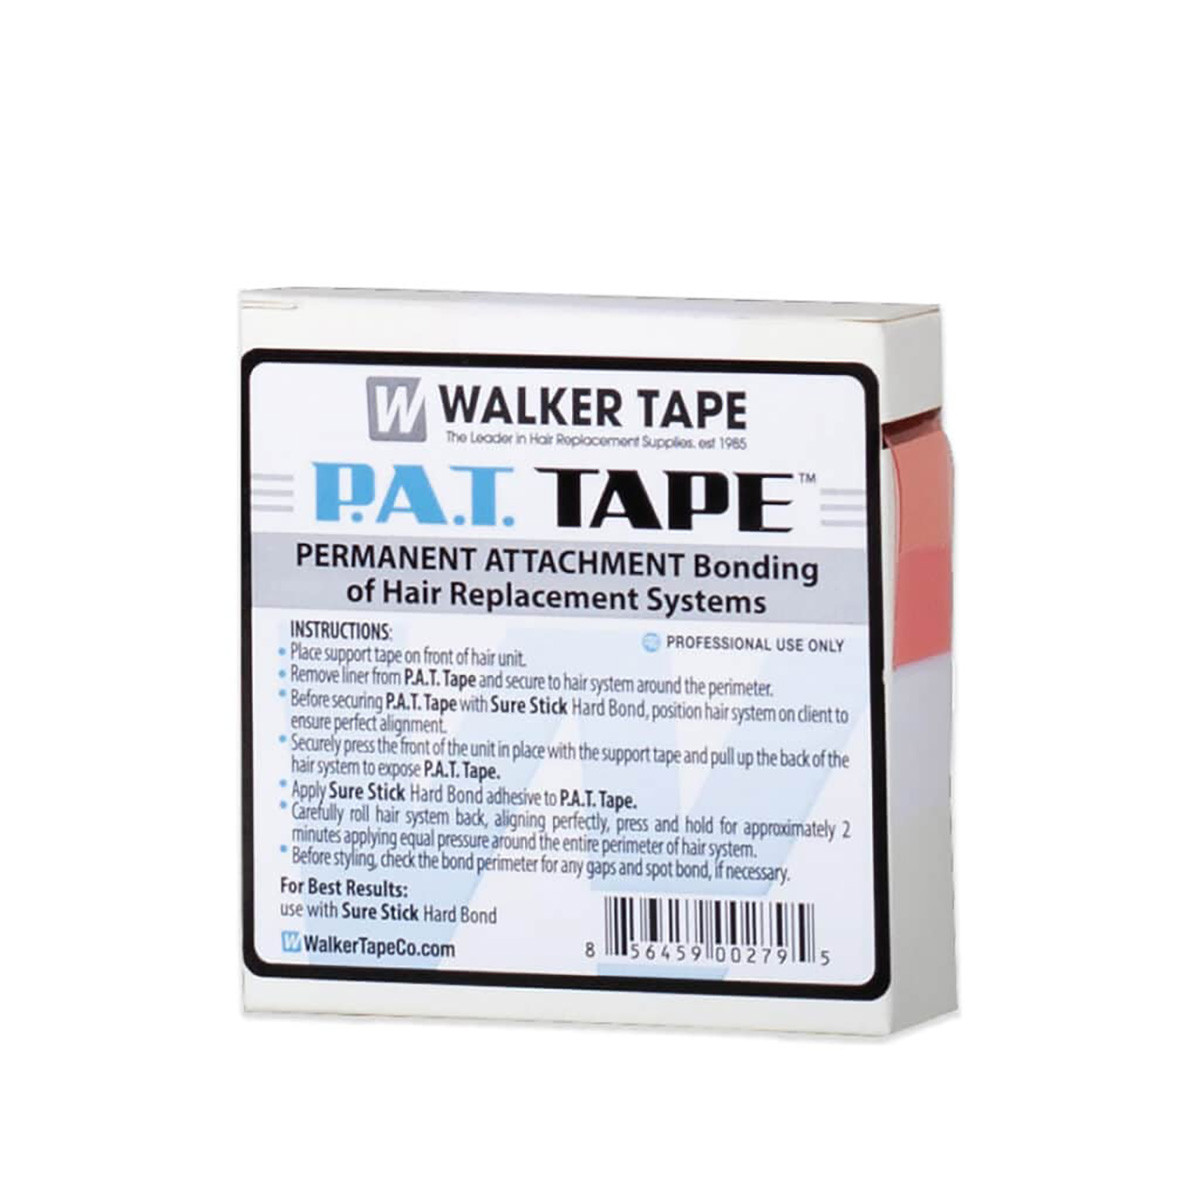 P.A.T. TAPE - 3/4" X 18 YDS, ROLL - Click Image to Close